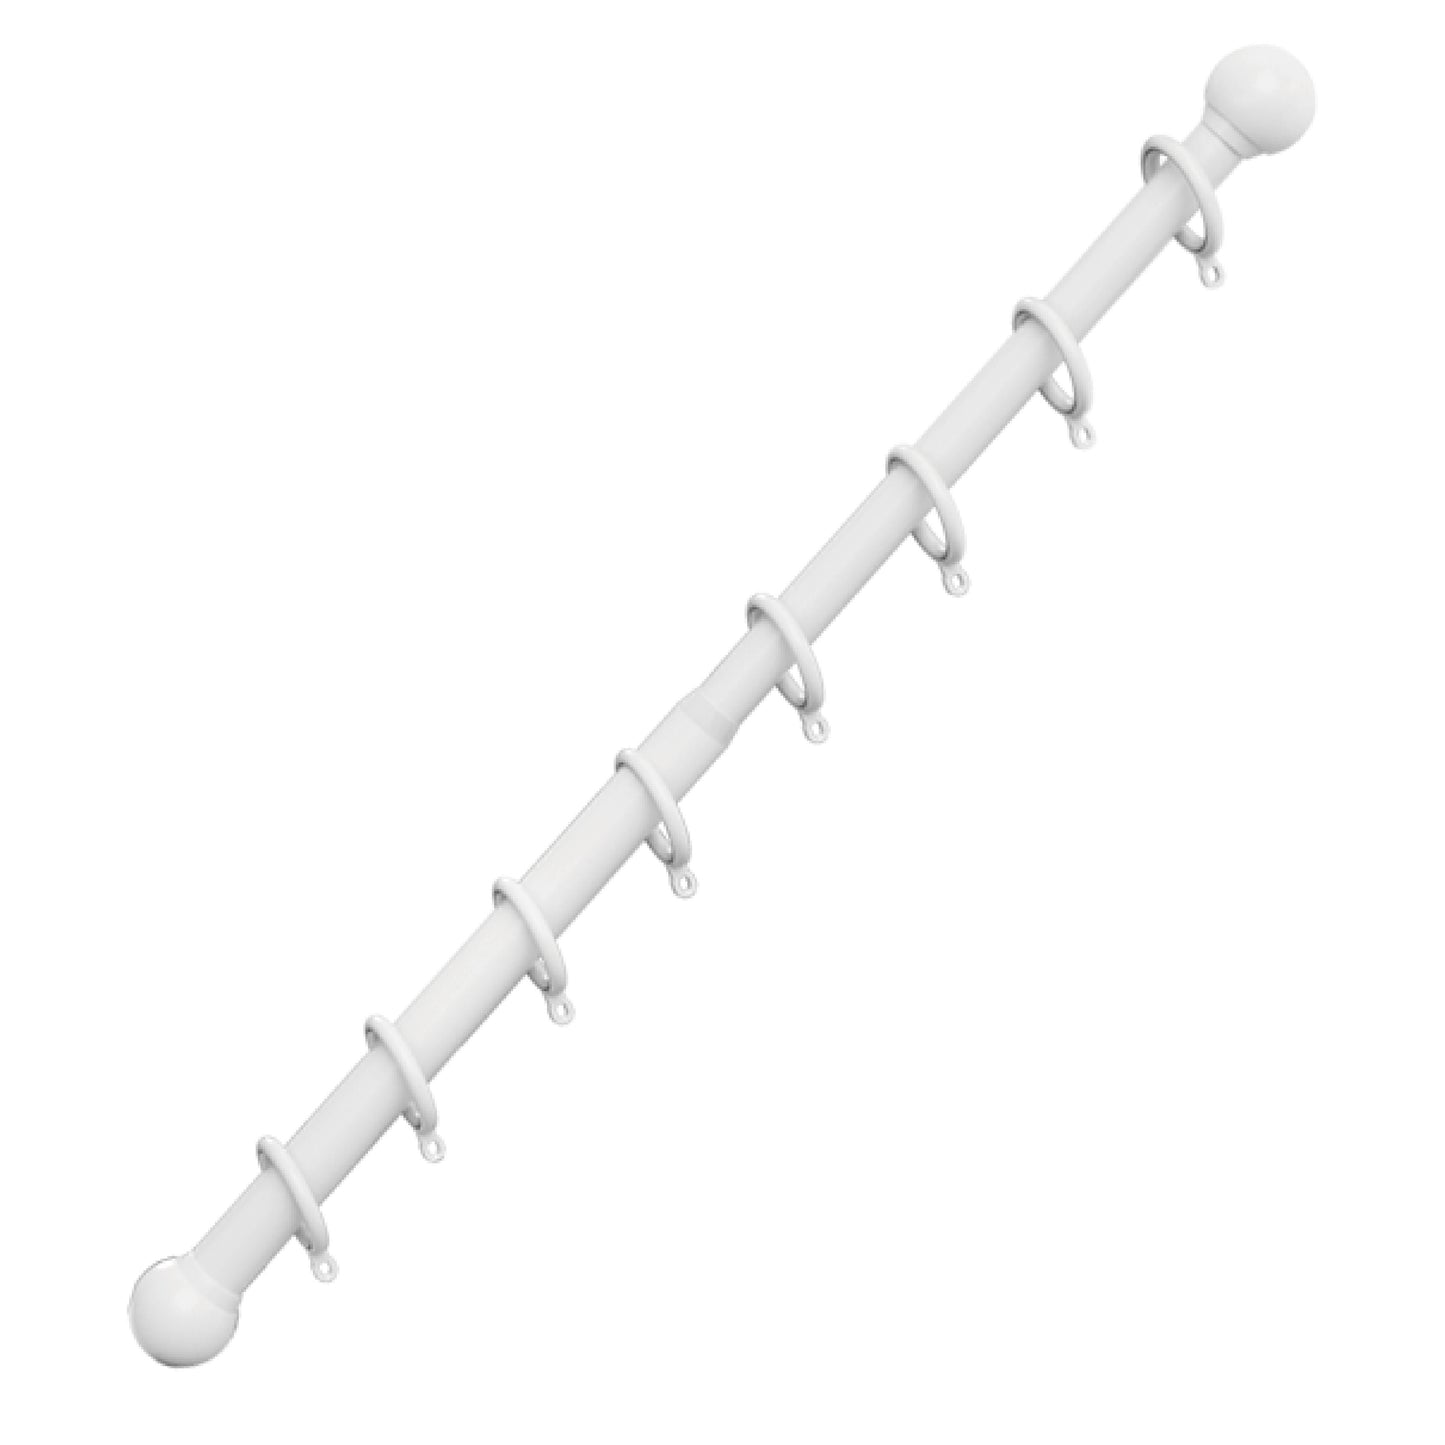 EaseGlide Whisper-Silent Telescoping Roman Rod in white with adjustable length and modern design, ideal for effortless curtain operation